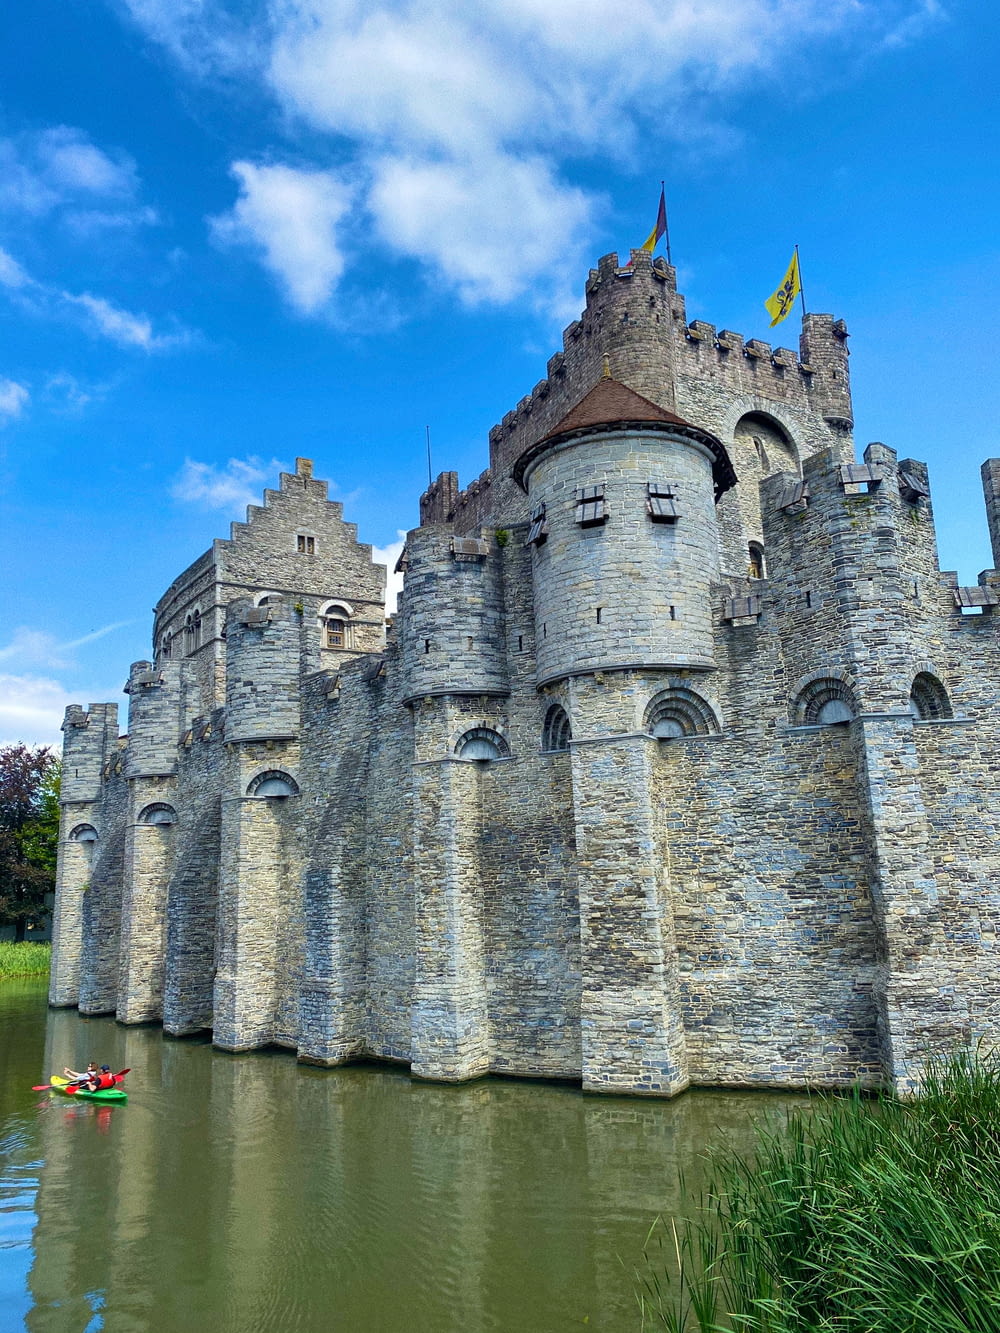 grey concrete castle near body of water under blue sky during daytime